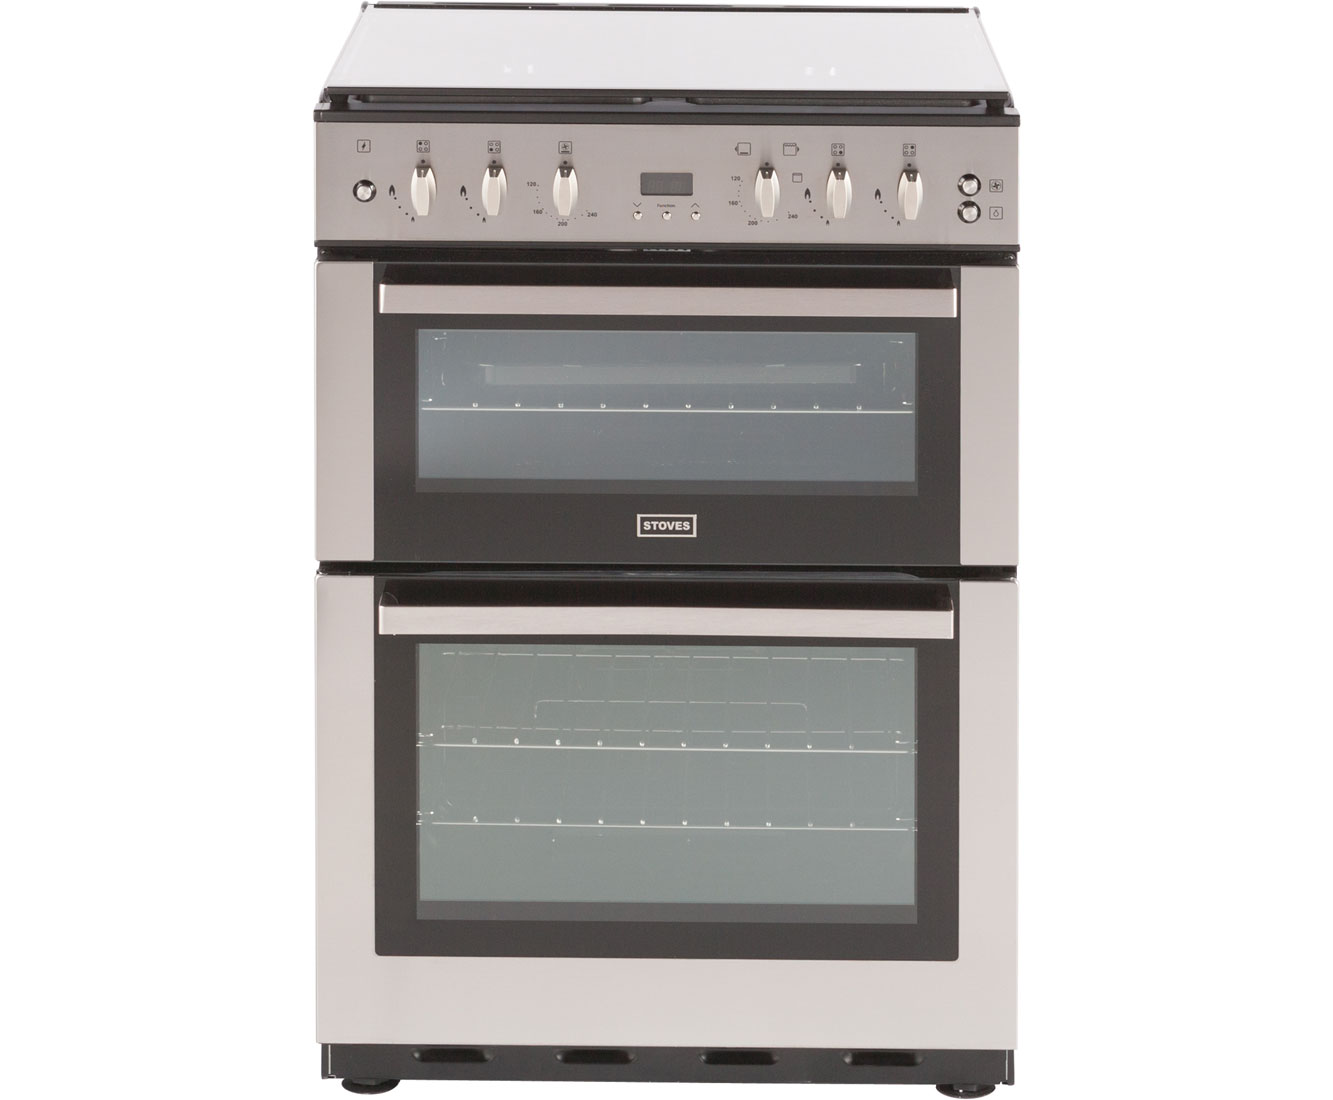 Stoves SFG60DOP Free Standing Cooker in Stainless Steel